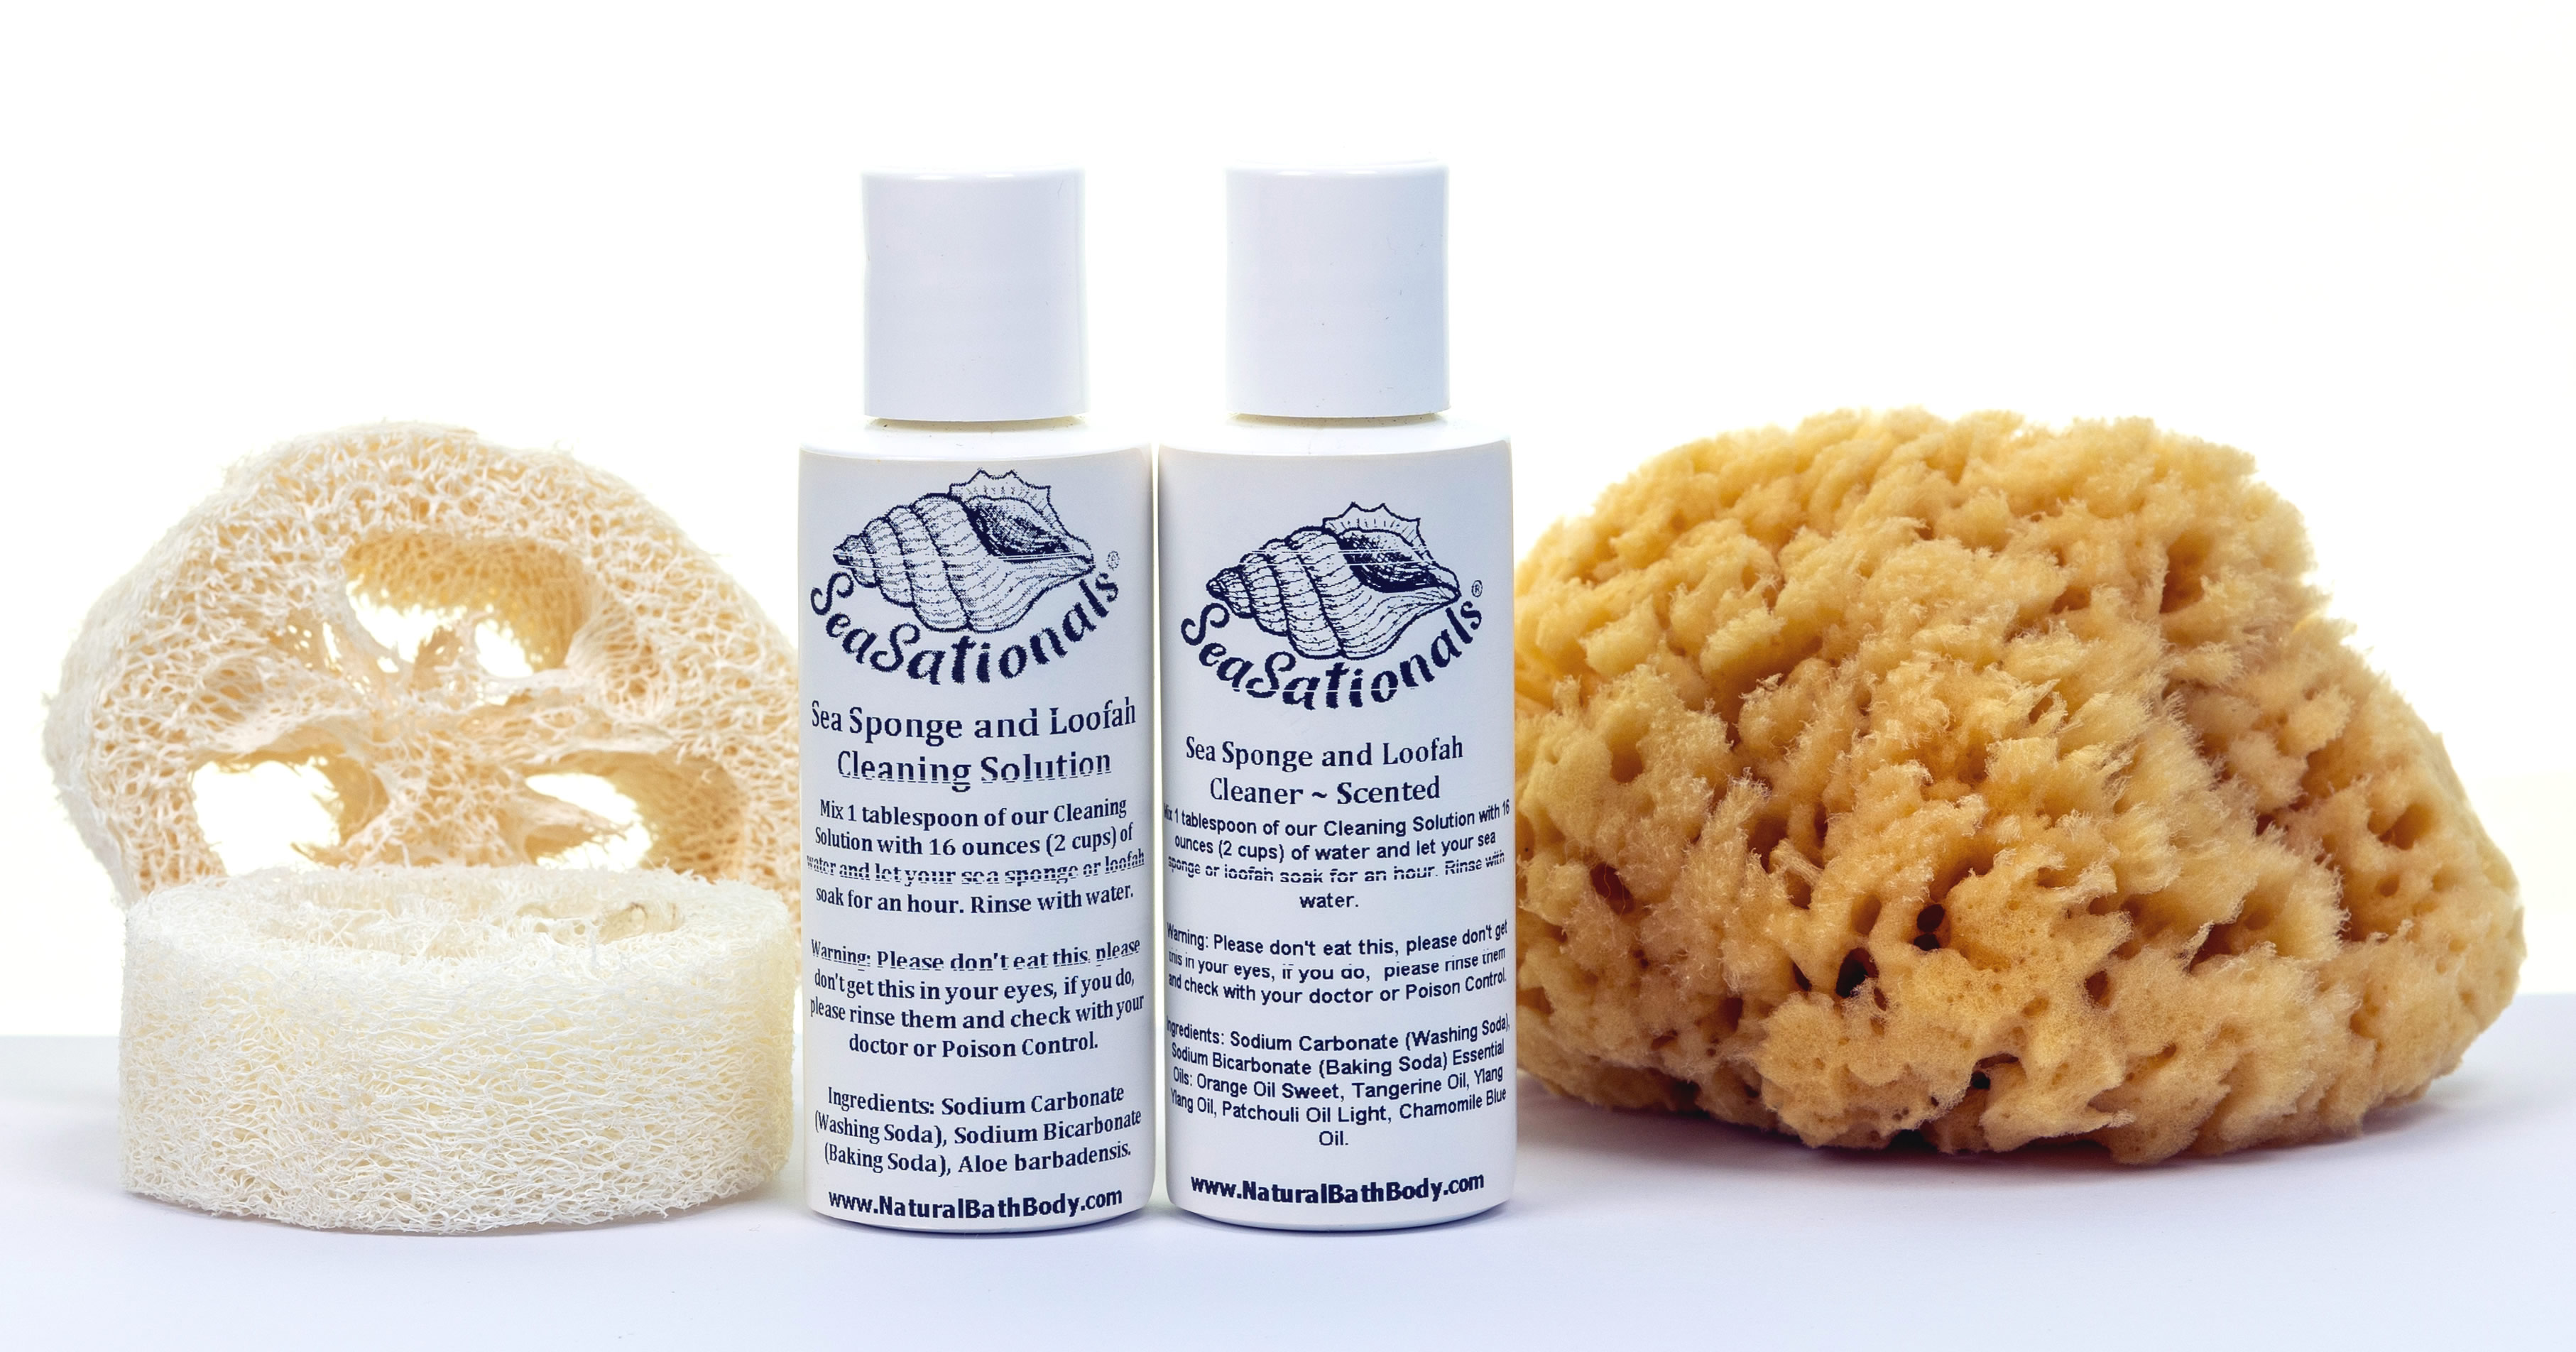 https://www.naturalbathbody.com/images/product/sea-sponge-cleaning-solution-group.jpg